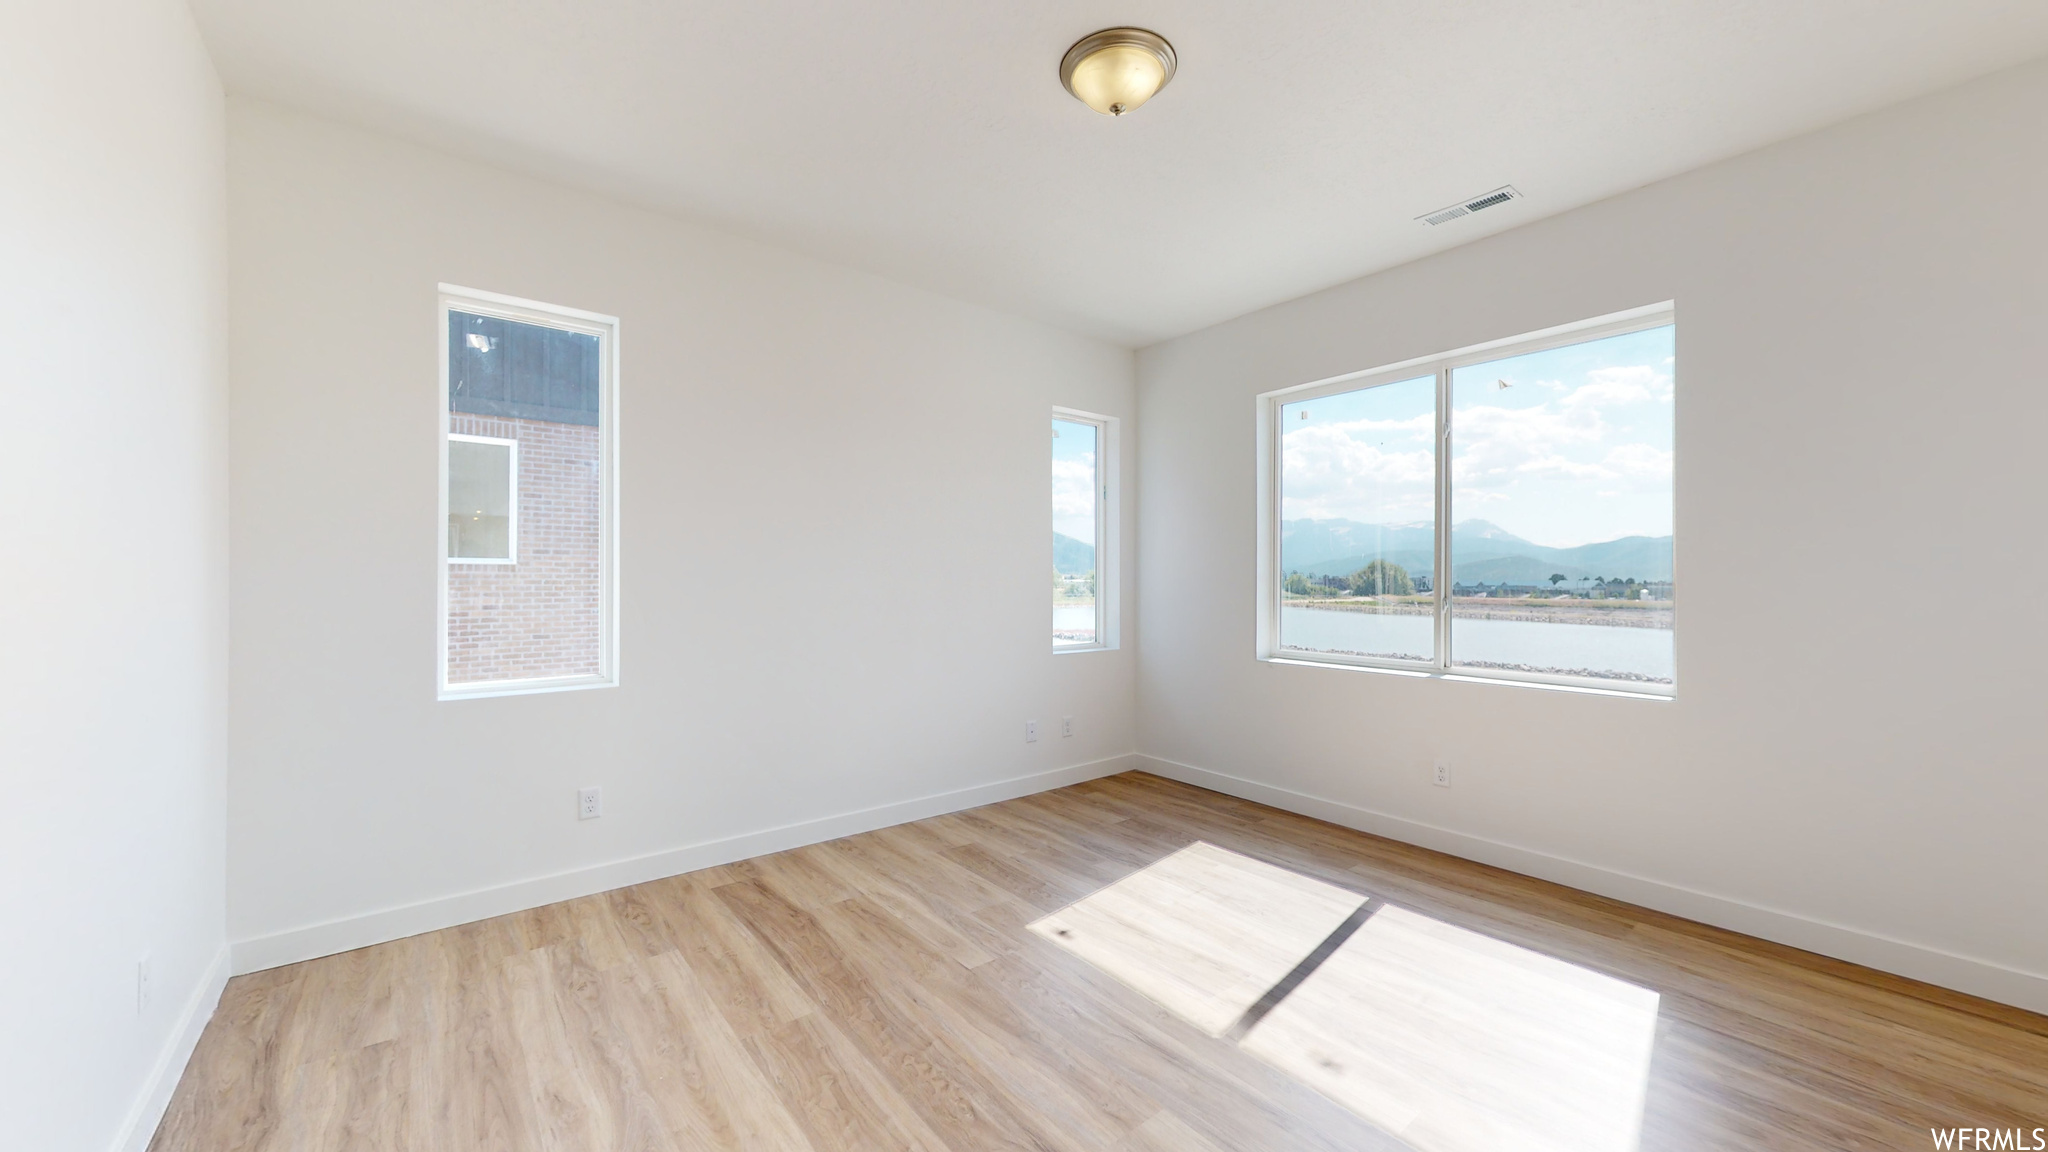 Unfurnished room with light hardwood / wood-style flooring and a water and mountain view